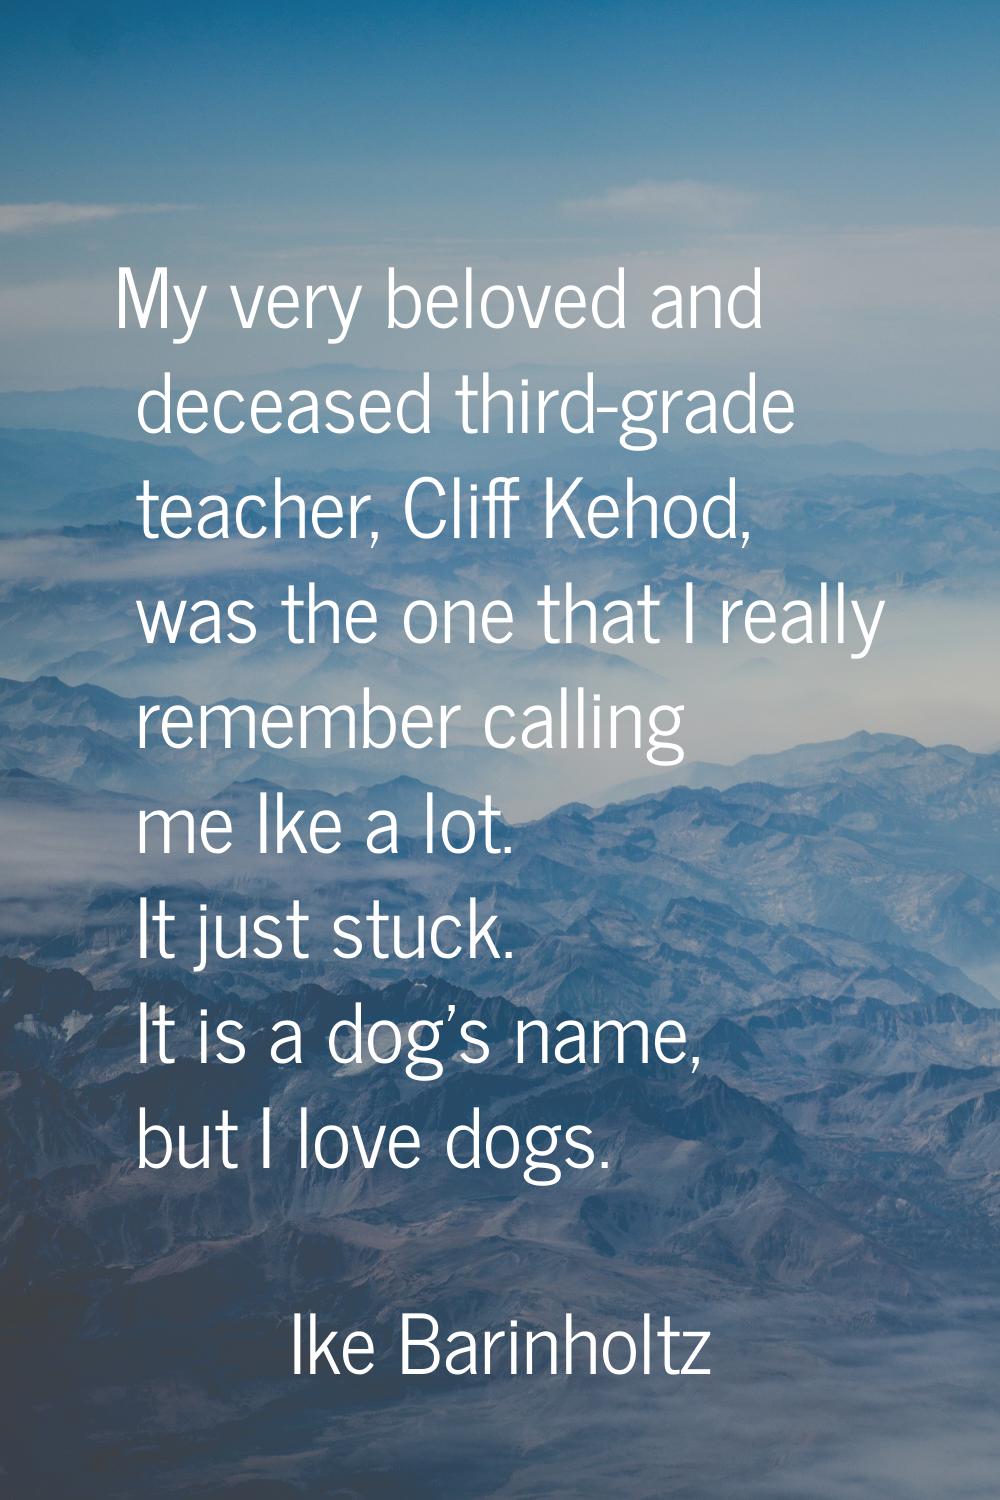 My very beloved and deceased third-grade teacher, Cliff Kehod, was the one that I really remember c